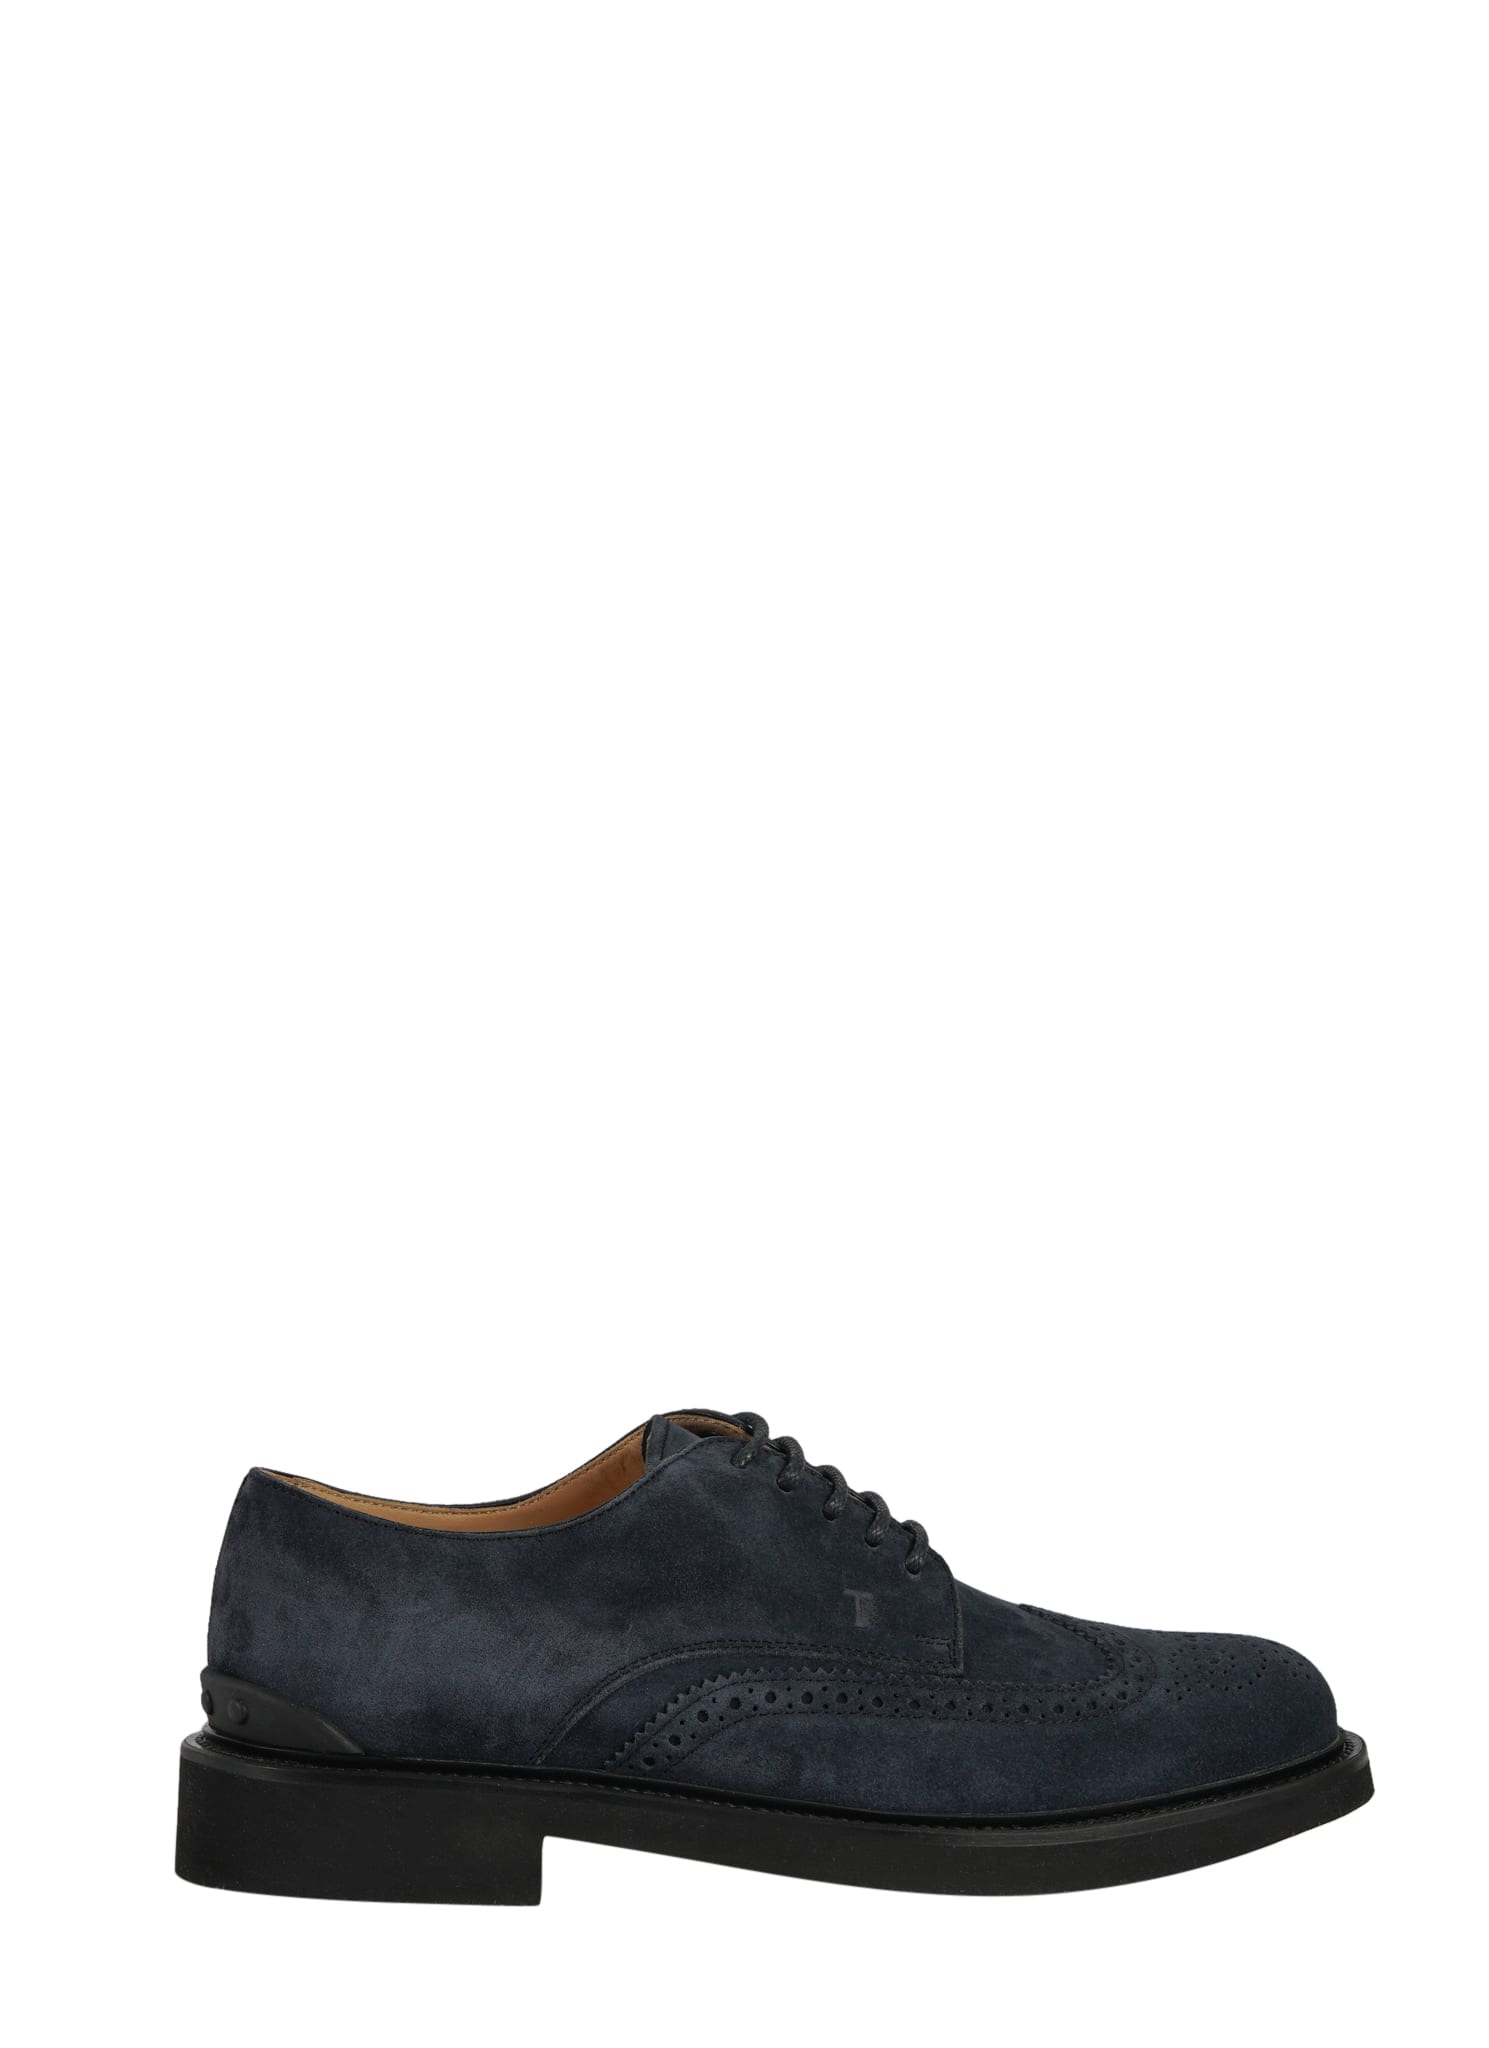 Tods All. Bucature Semiformale Laced Shoe